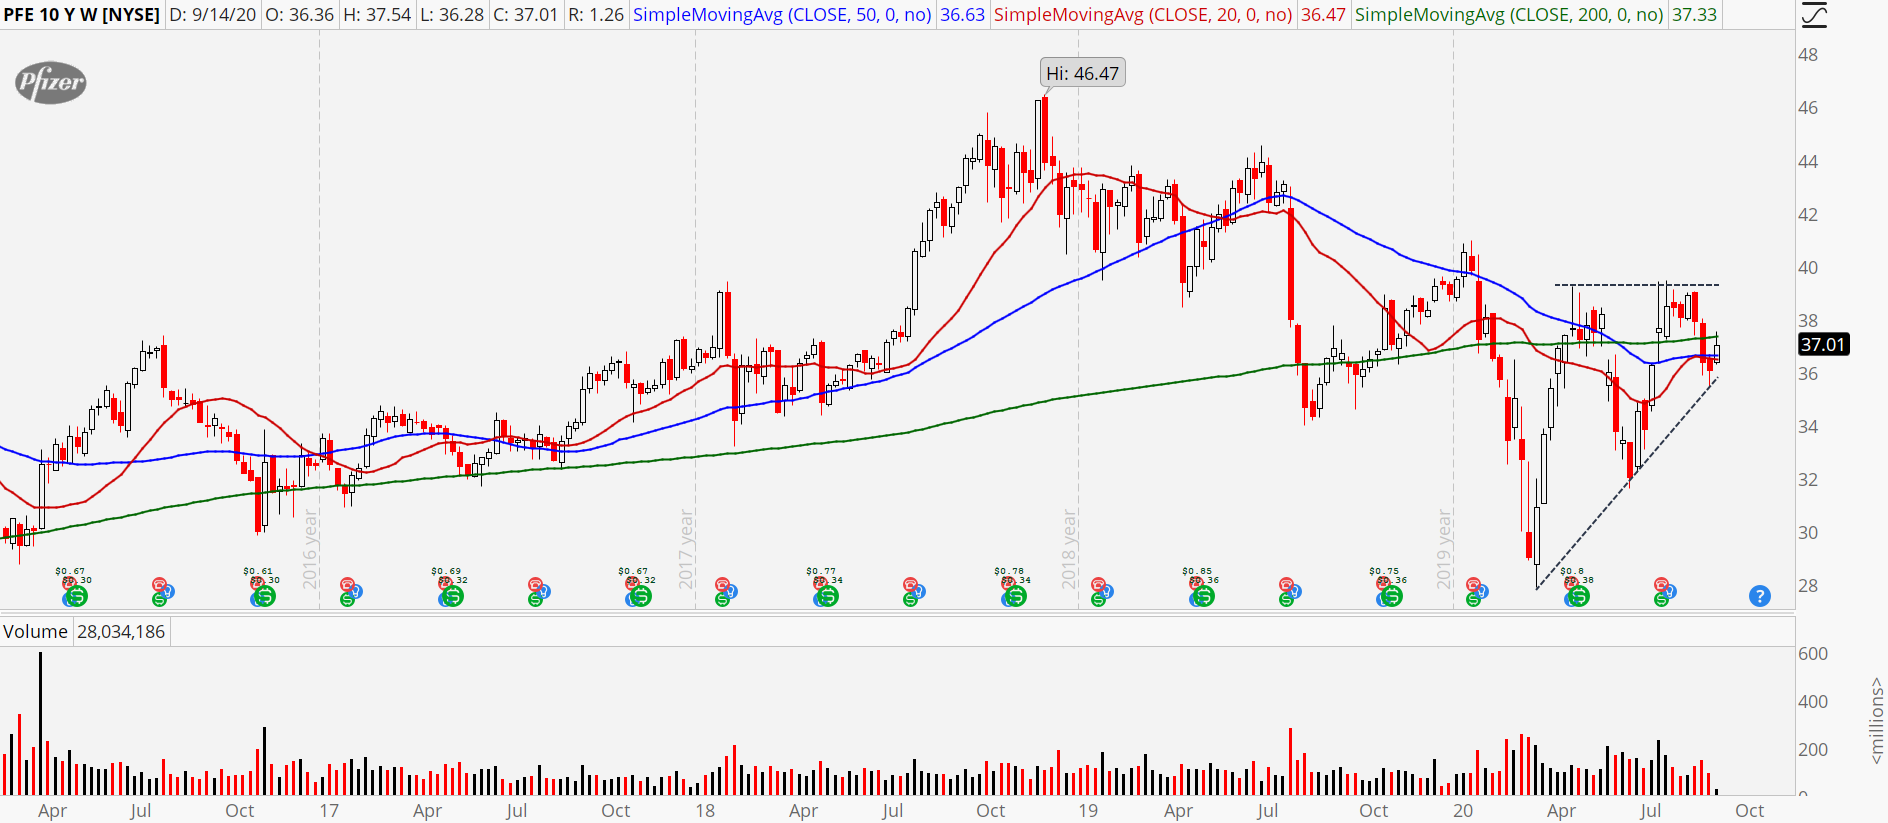 Pfizer (PFE) weekly chart showing ascending triangle